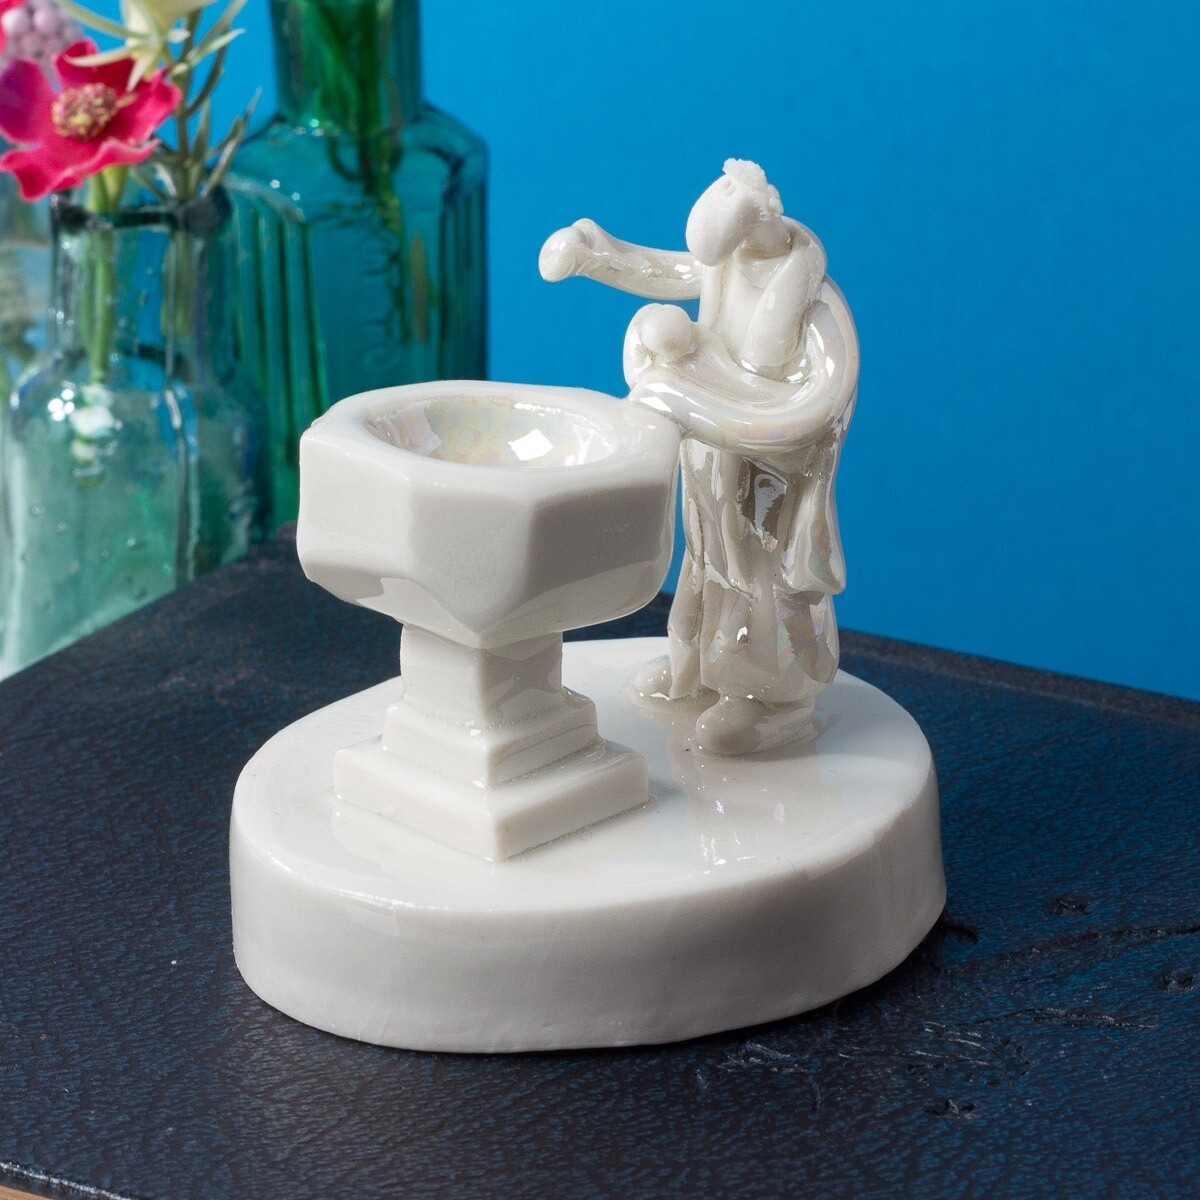 Ceramic Christening Font Miniature Sculpture by Andrew Bull